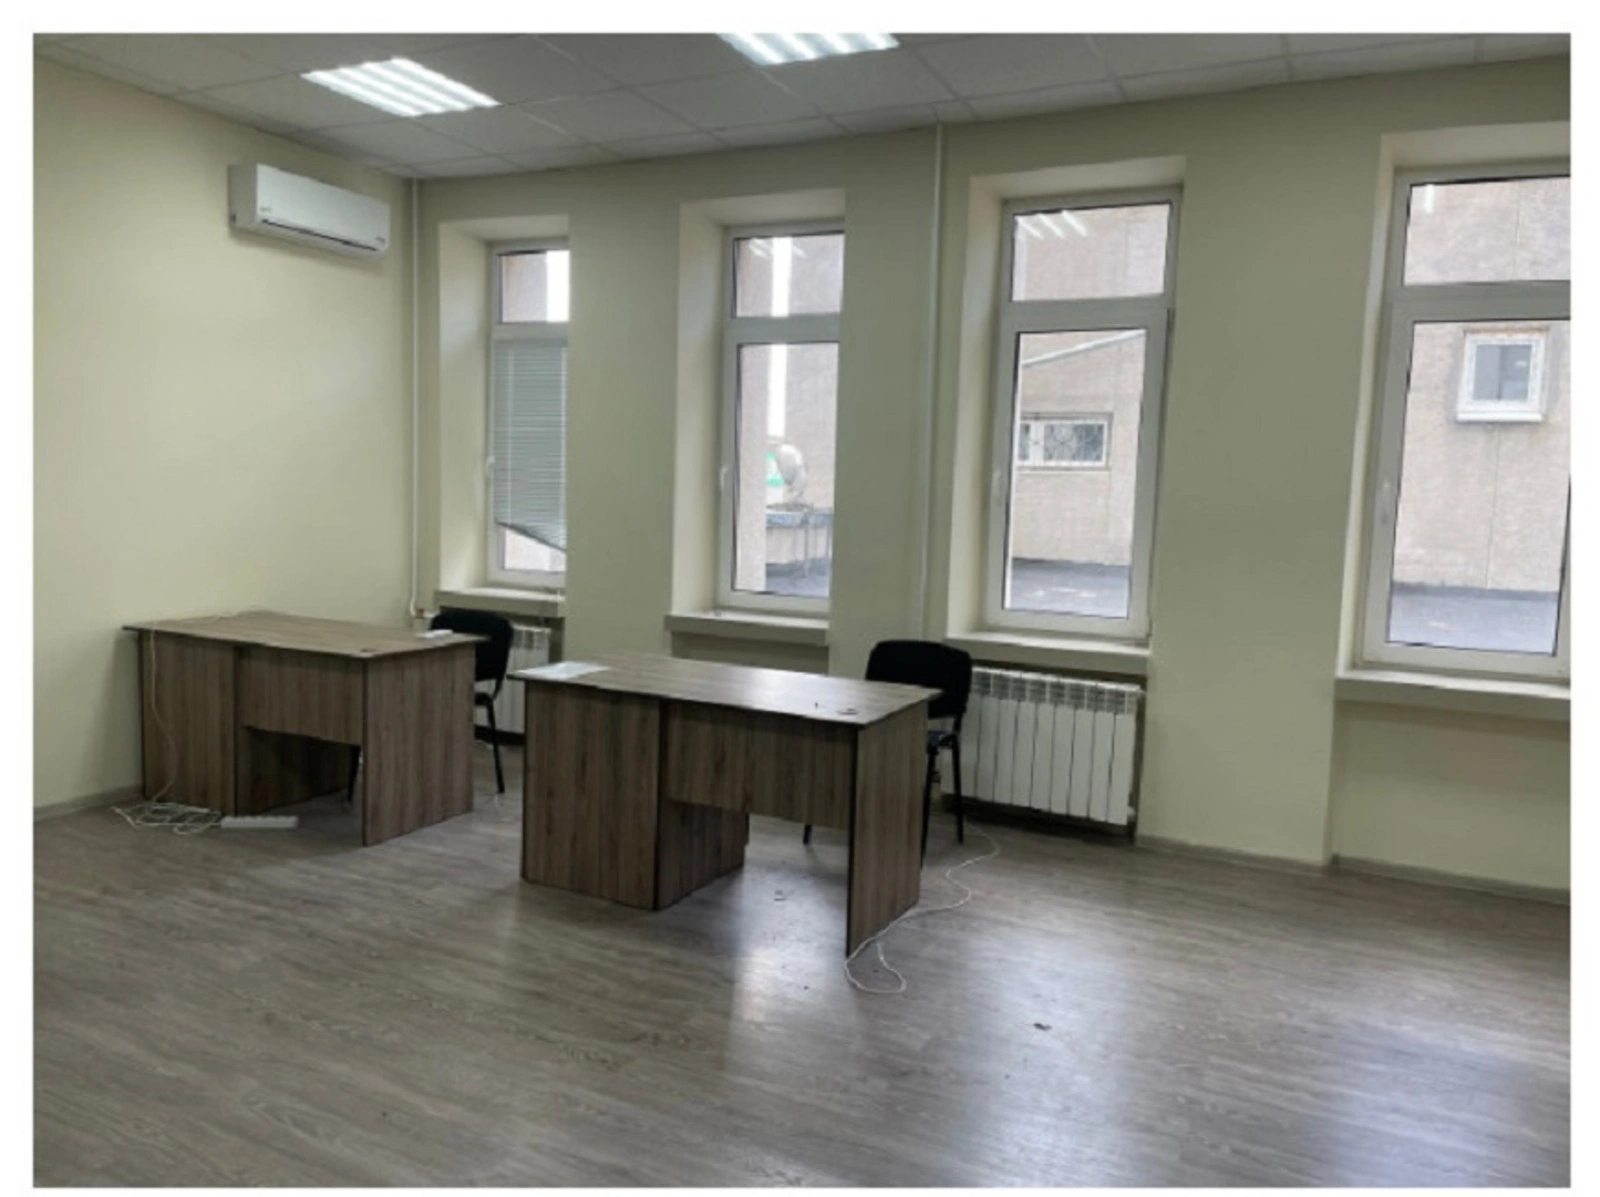 Real estate for sale for commercial purposes. 33 m², 8th floor/10 floors. Torhovytsya vul., Ternopil. 